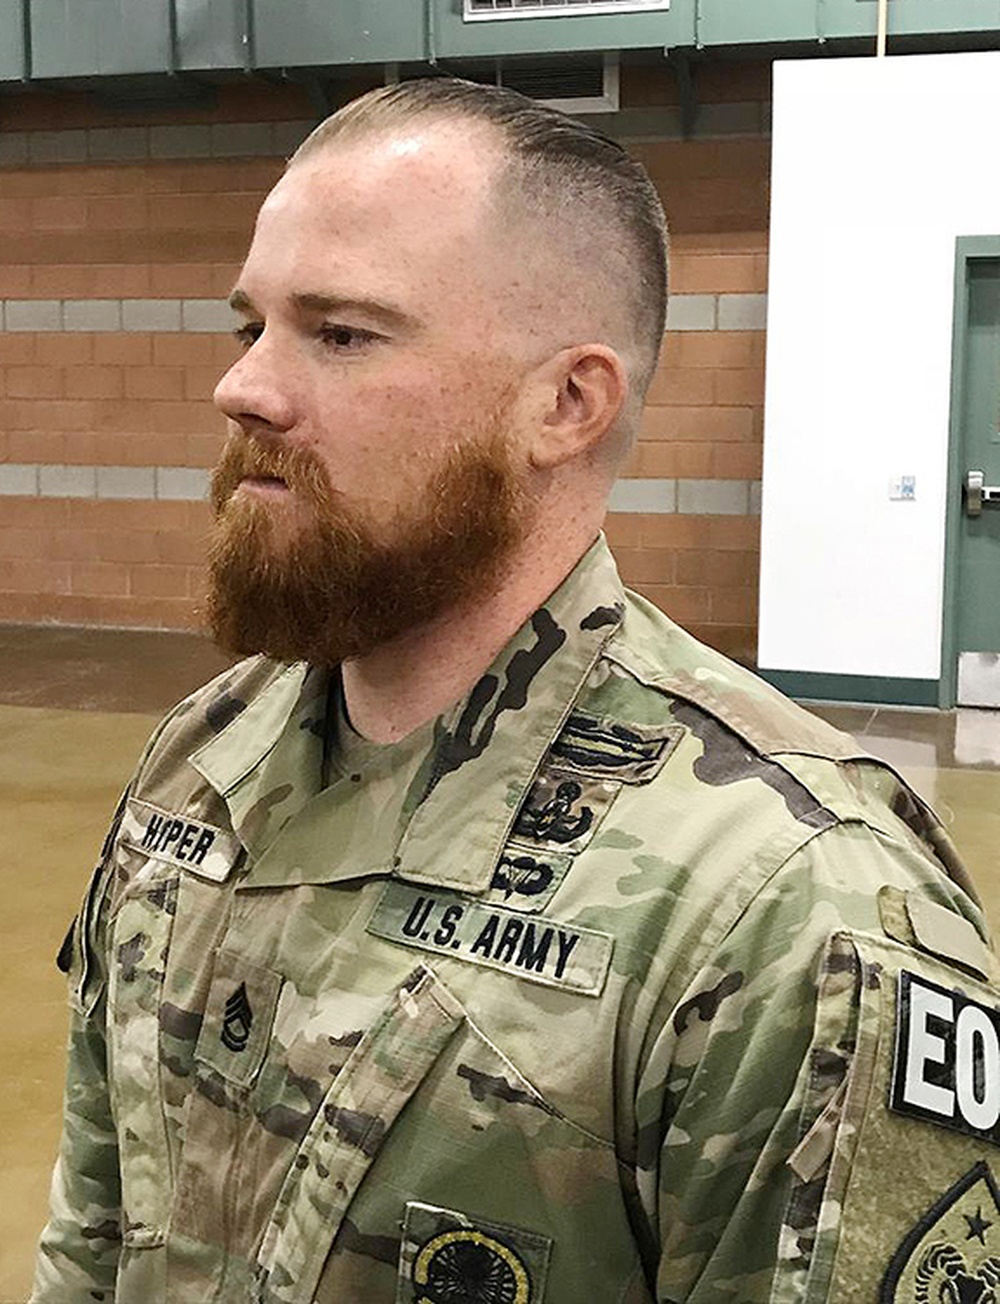 DVIDS - News - Number of religious accommodations, including beards, likely  to grow in Nevada Guard ranks